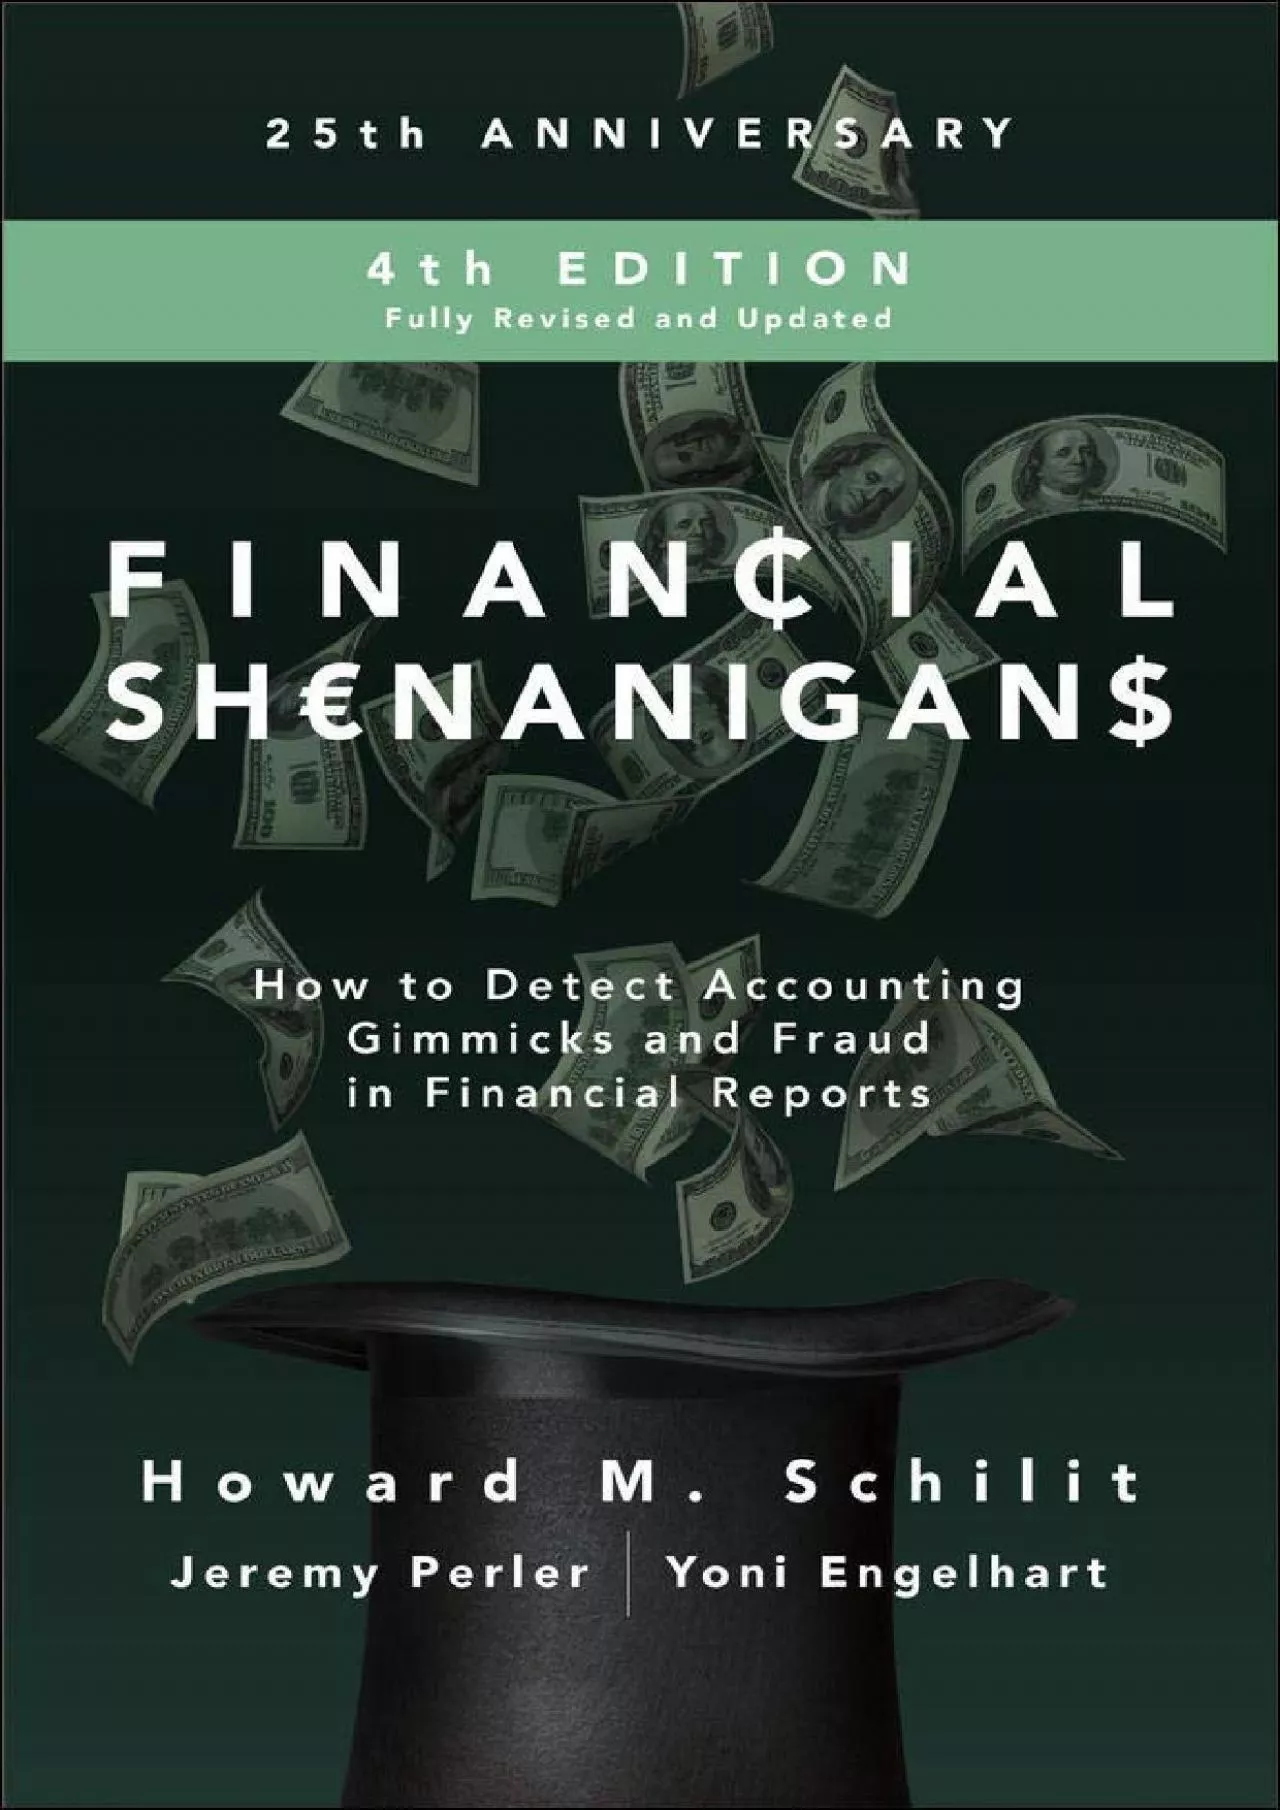 Financial Shenanigans Fourth Edition: How to Detect Accounting Gimmicks & Fraud in Financial